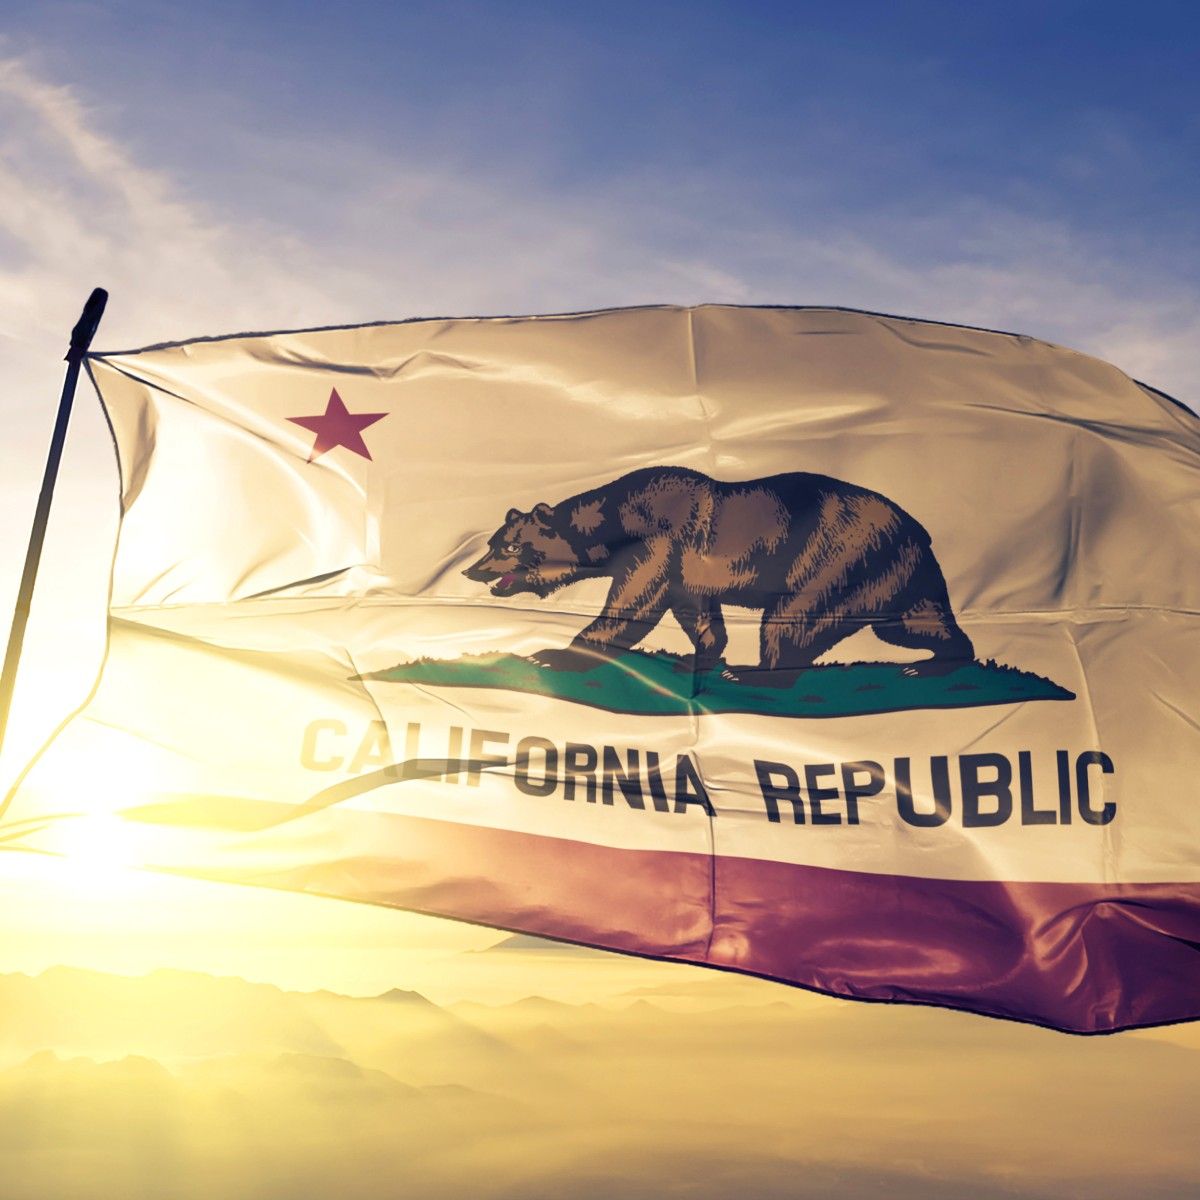 The state flag of California flutters against a blue sky and bright sunrise. The flag features a bear walking on green grass with a red star above it and the words &quot;California Republic&quot; below it.